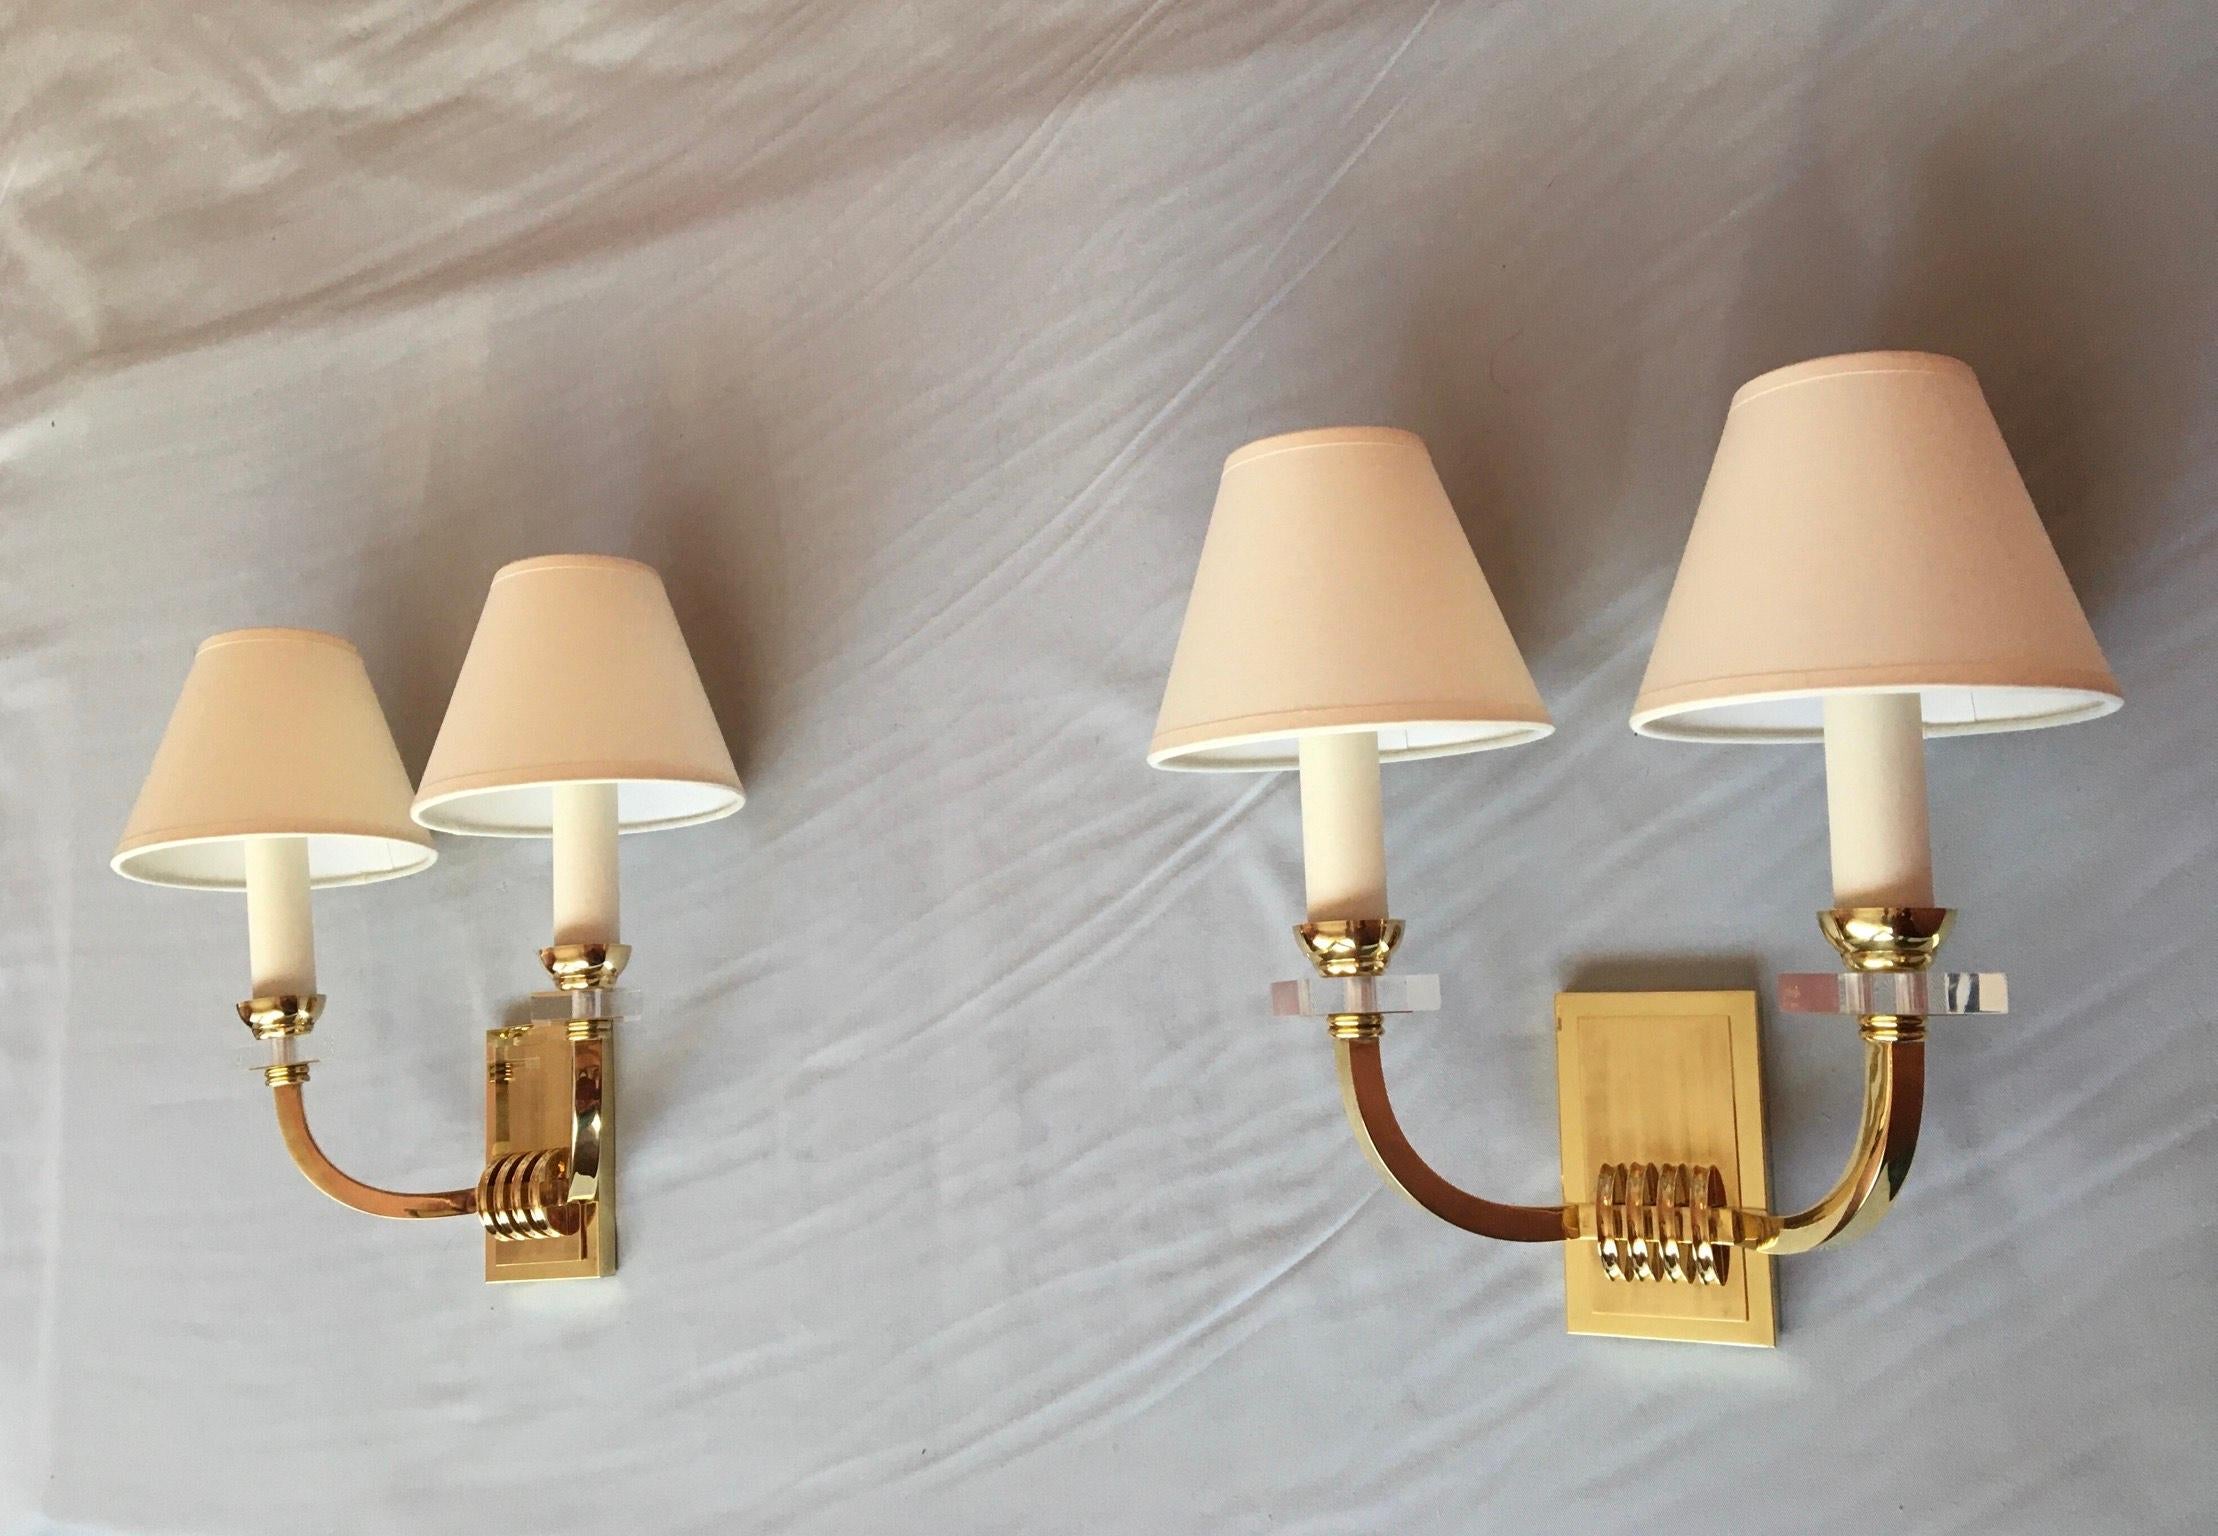 Jacques Adnet Neoclassical Pair of Bronze Sconces, France, 1950 For Sale 2